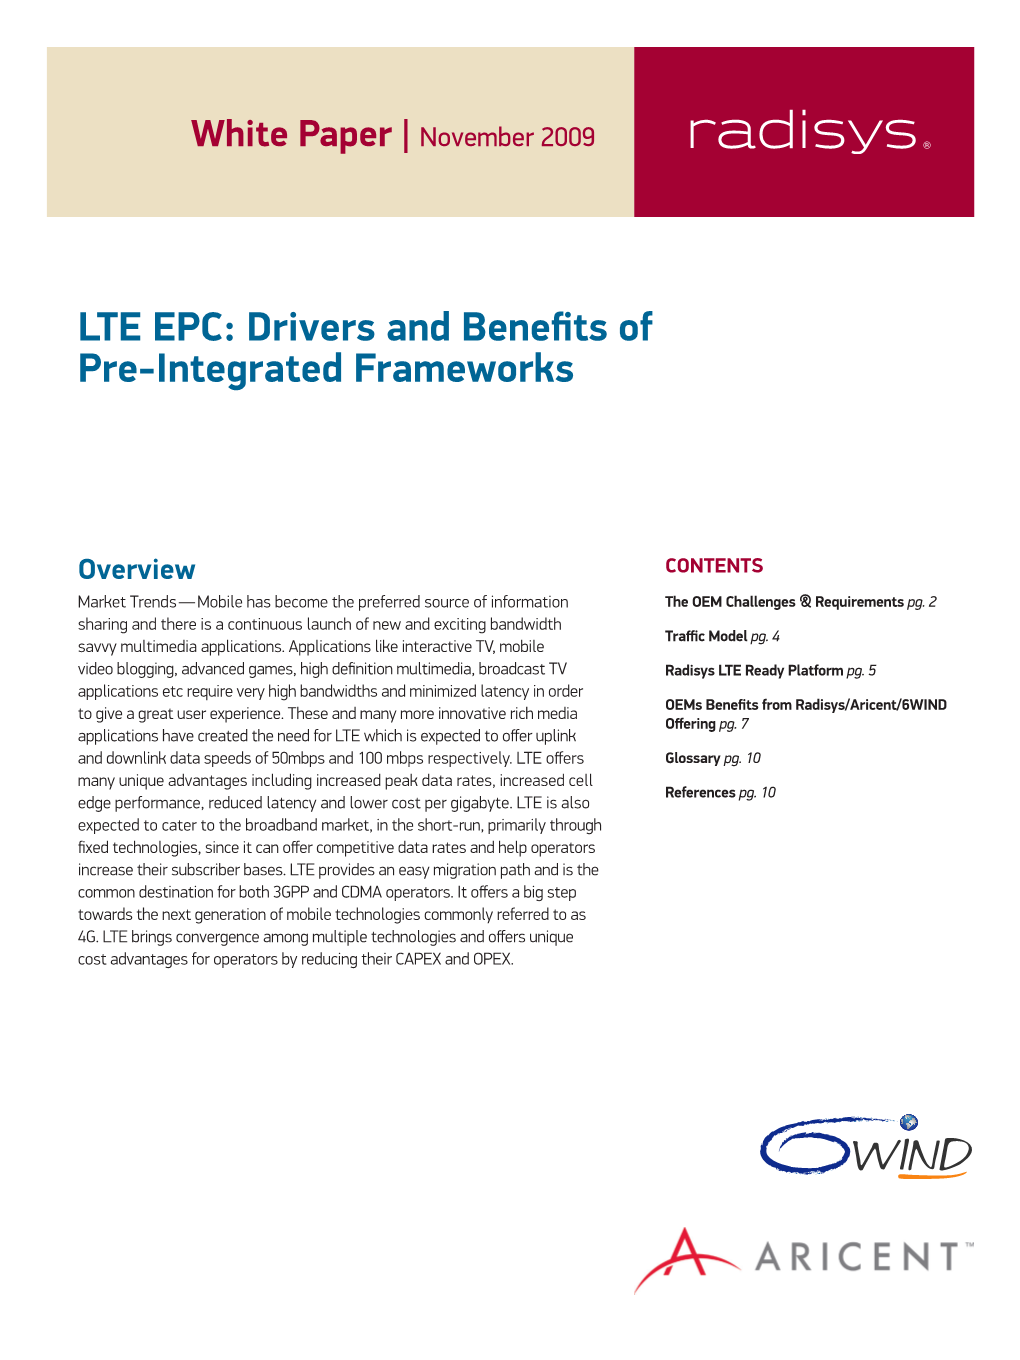 LTE EPC: Drivers and Benefits of Pre-Integrated Frameworks